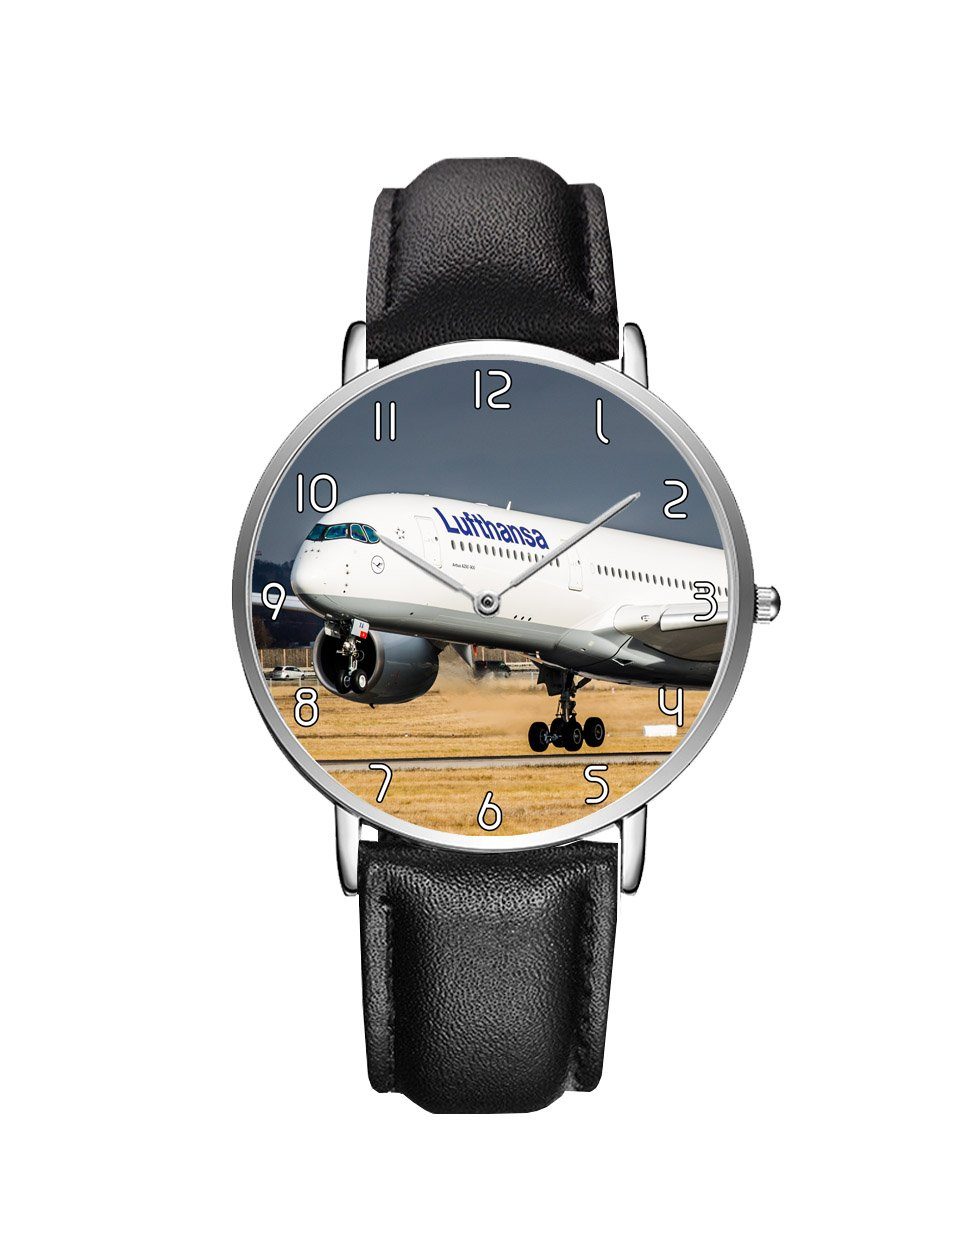 Lutfhansa A350 Printed Leather Strap Watches Aviation Shop Silver & Black Leather Strap 